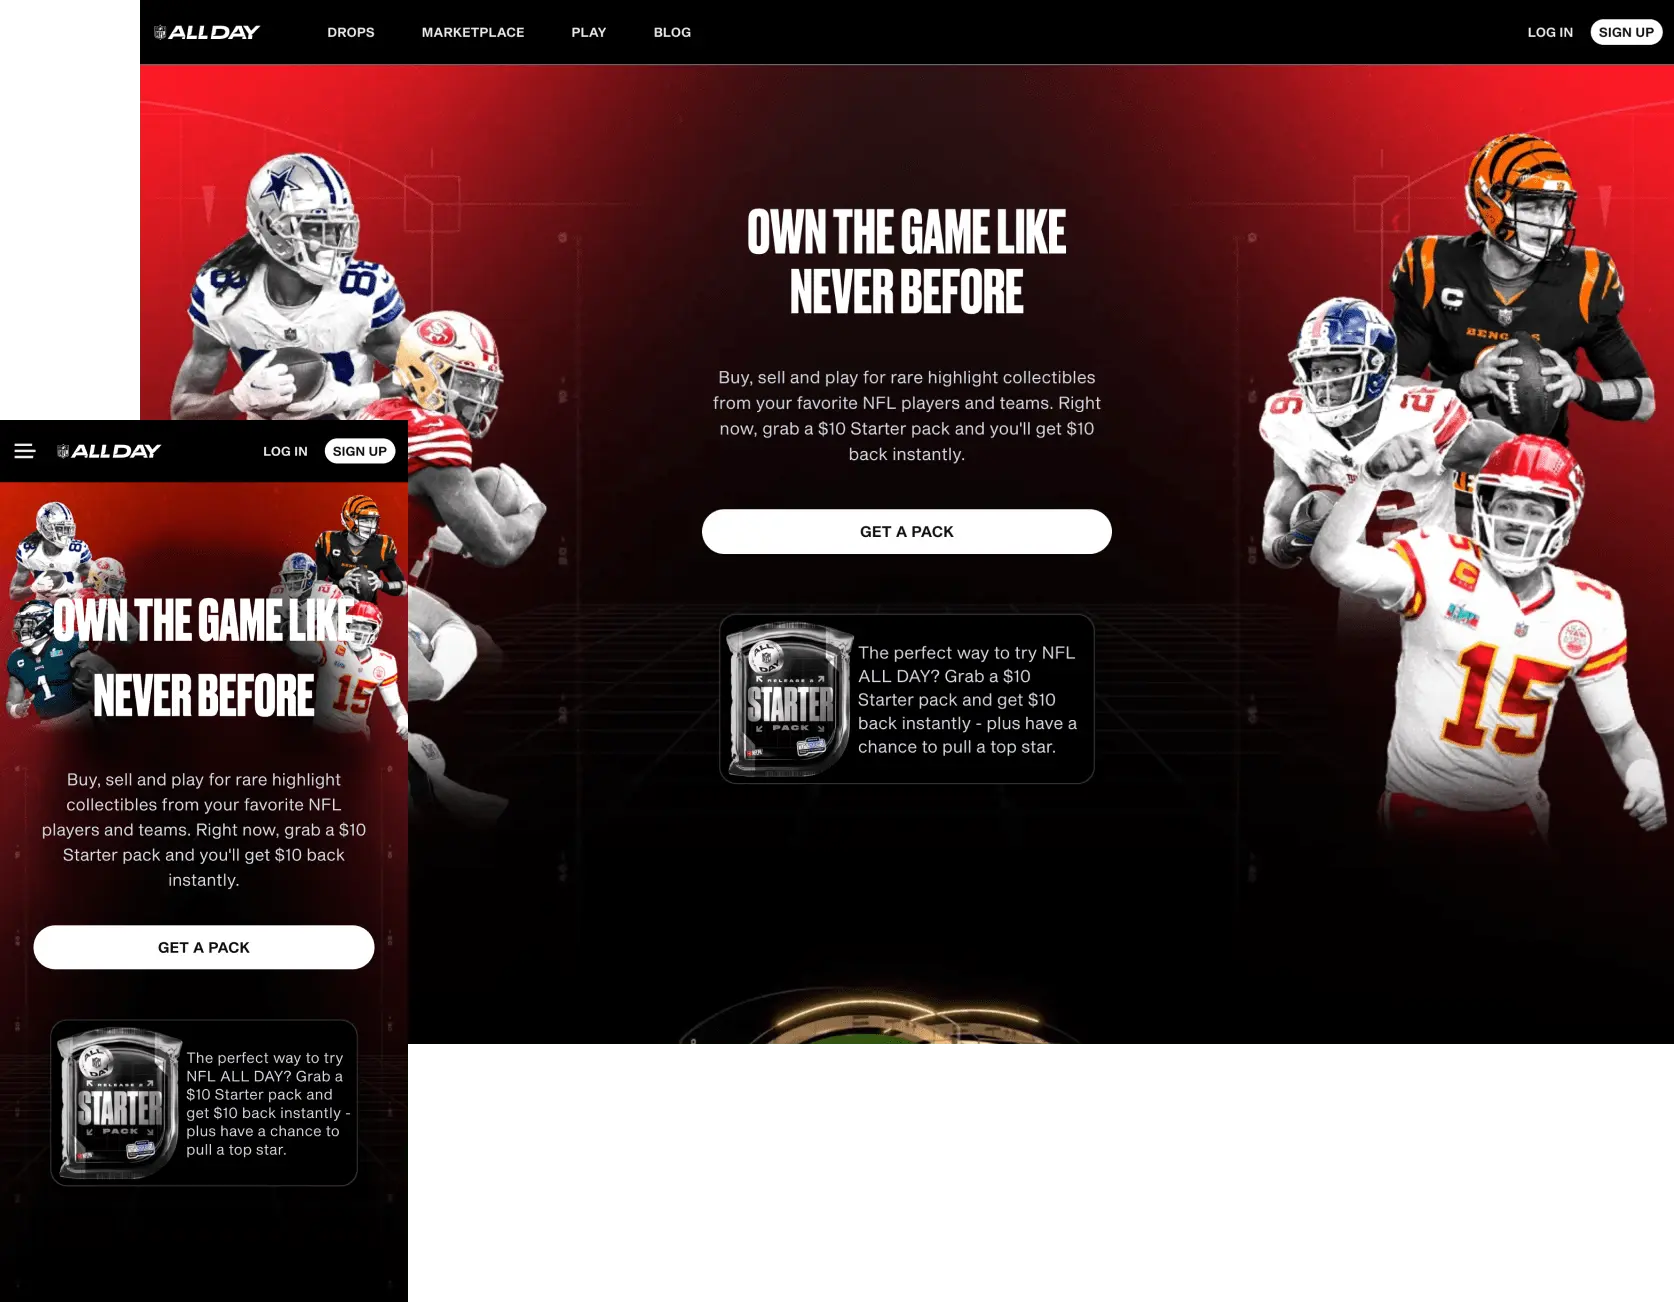 Image of NFL All webpage showing mobile and desktop views